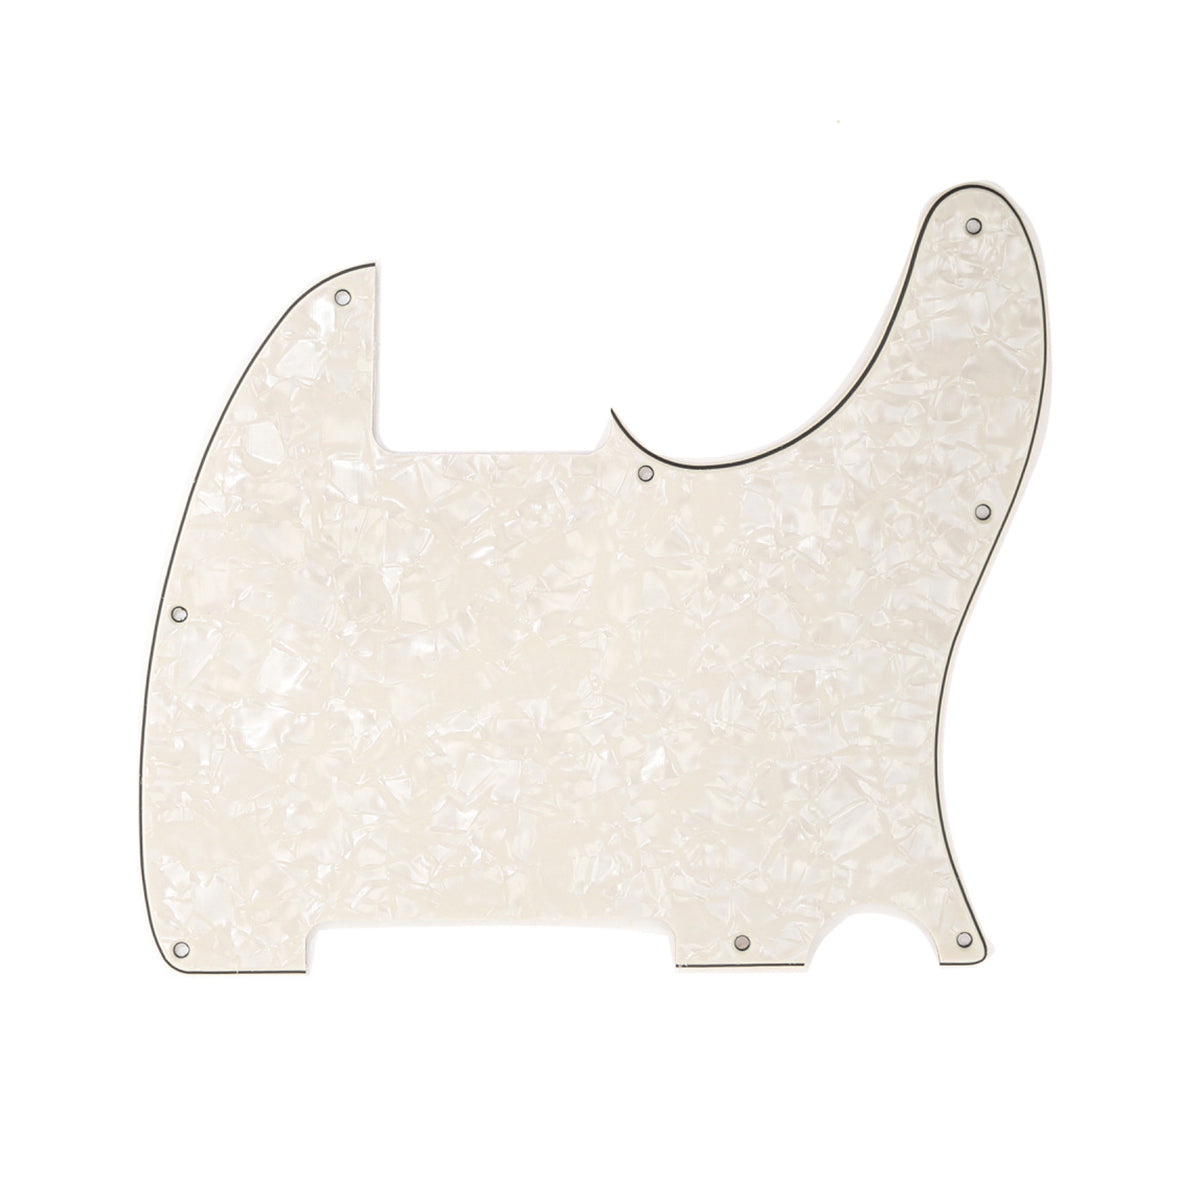 Musiclily 8 Hole Tele Pickguard Blank for Fender USA/Mexican Telecaster Esquire Guitar, 4Ply Parchment Pearl